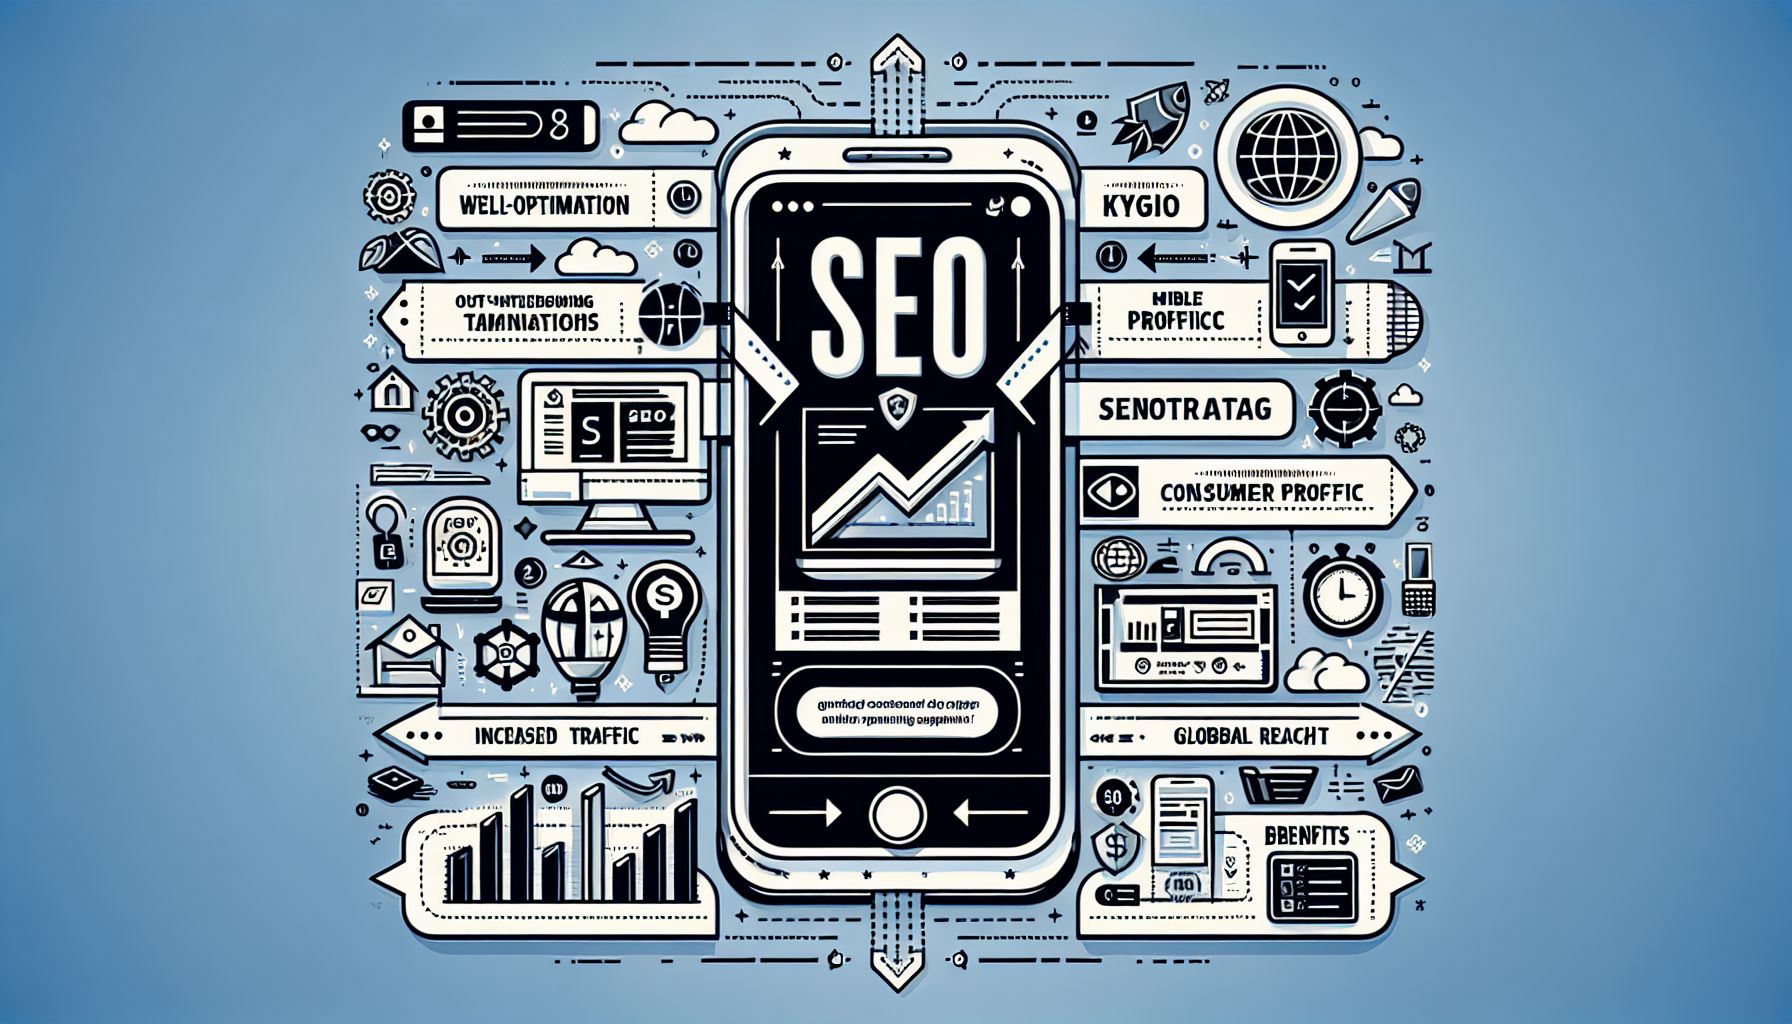 #The Importance of SEO in Digital Marketing